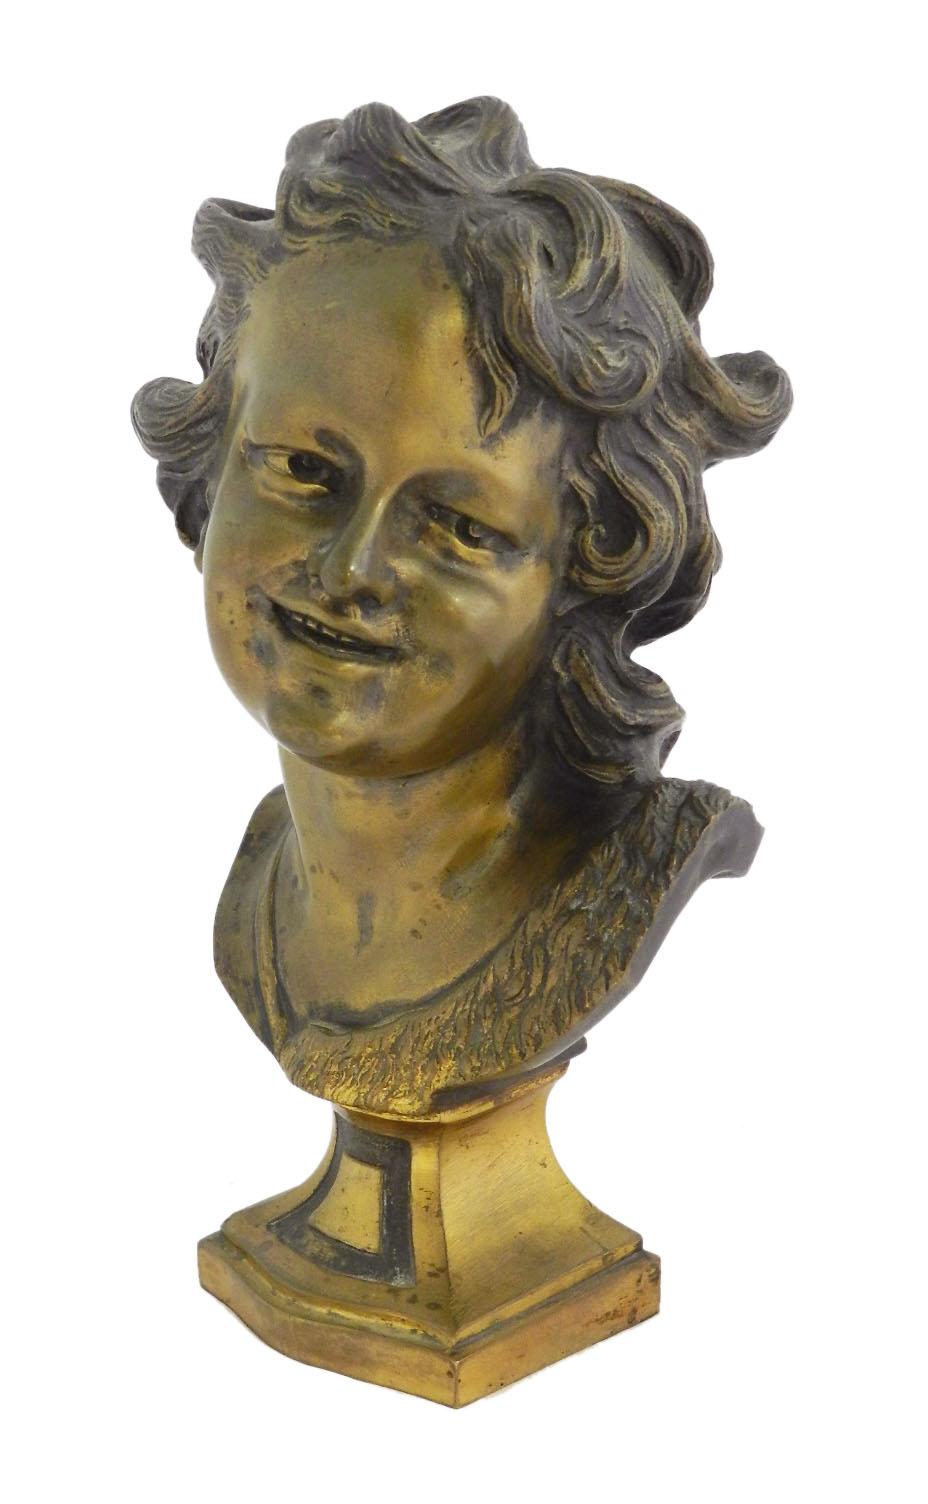 Antique French bronze bust 19th century
Decorative and heavy classical French figure head
Good condition with good patina due to age.


  